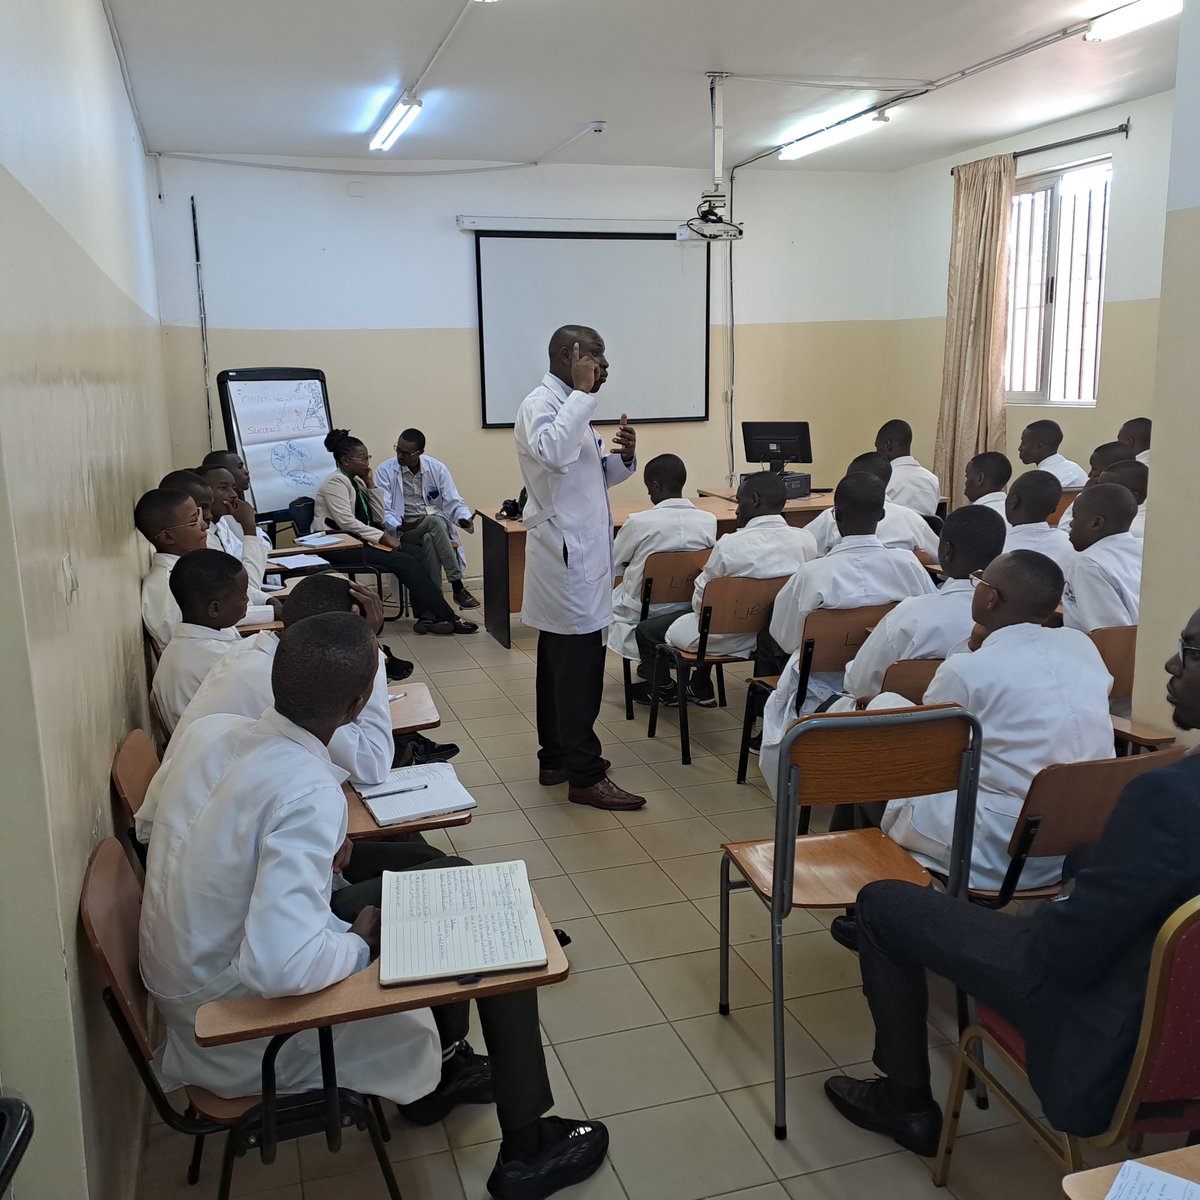 Today, @HospitalChuk was visited by students and staff from @HopeHavenRwanda, with intention to support them in informed Career Guidance and Counselling, for academics, careers and personal dpt success. They conversed with CHUK healthcare professionals about their eagerness